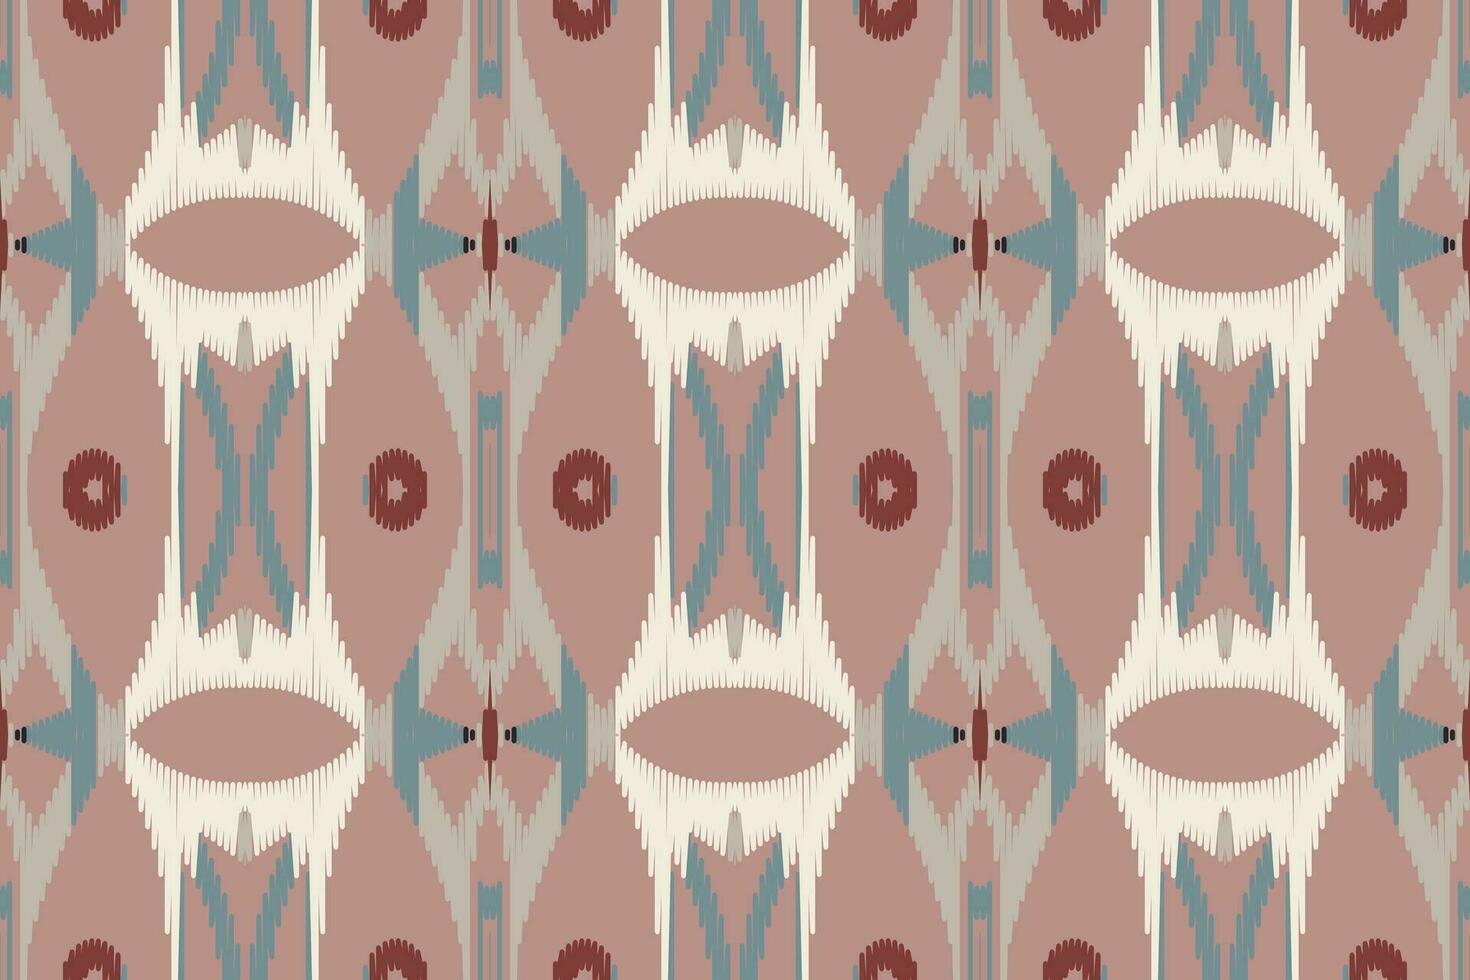 Ikat Seamless Pattern Embroidery Background. Ikat Patterns Geometric Ethnic Oriental Pattern traditional.aztec Style Abstract Vector design for Texture,fabric,clothing,wrapping,sarong.